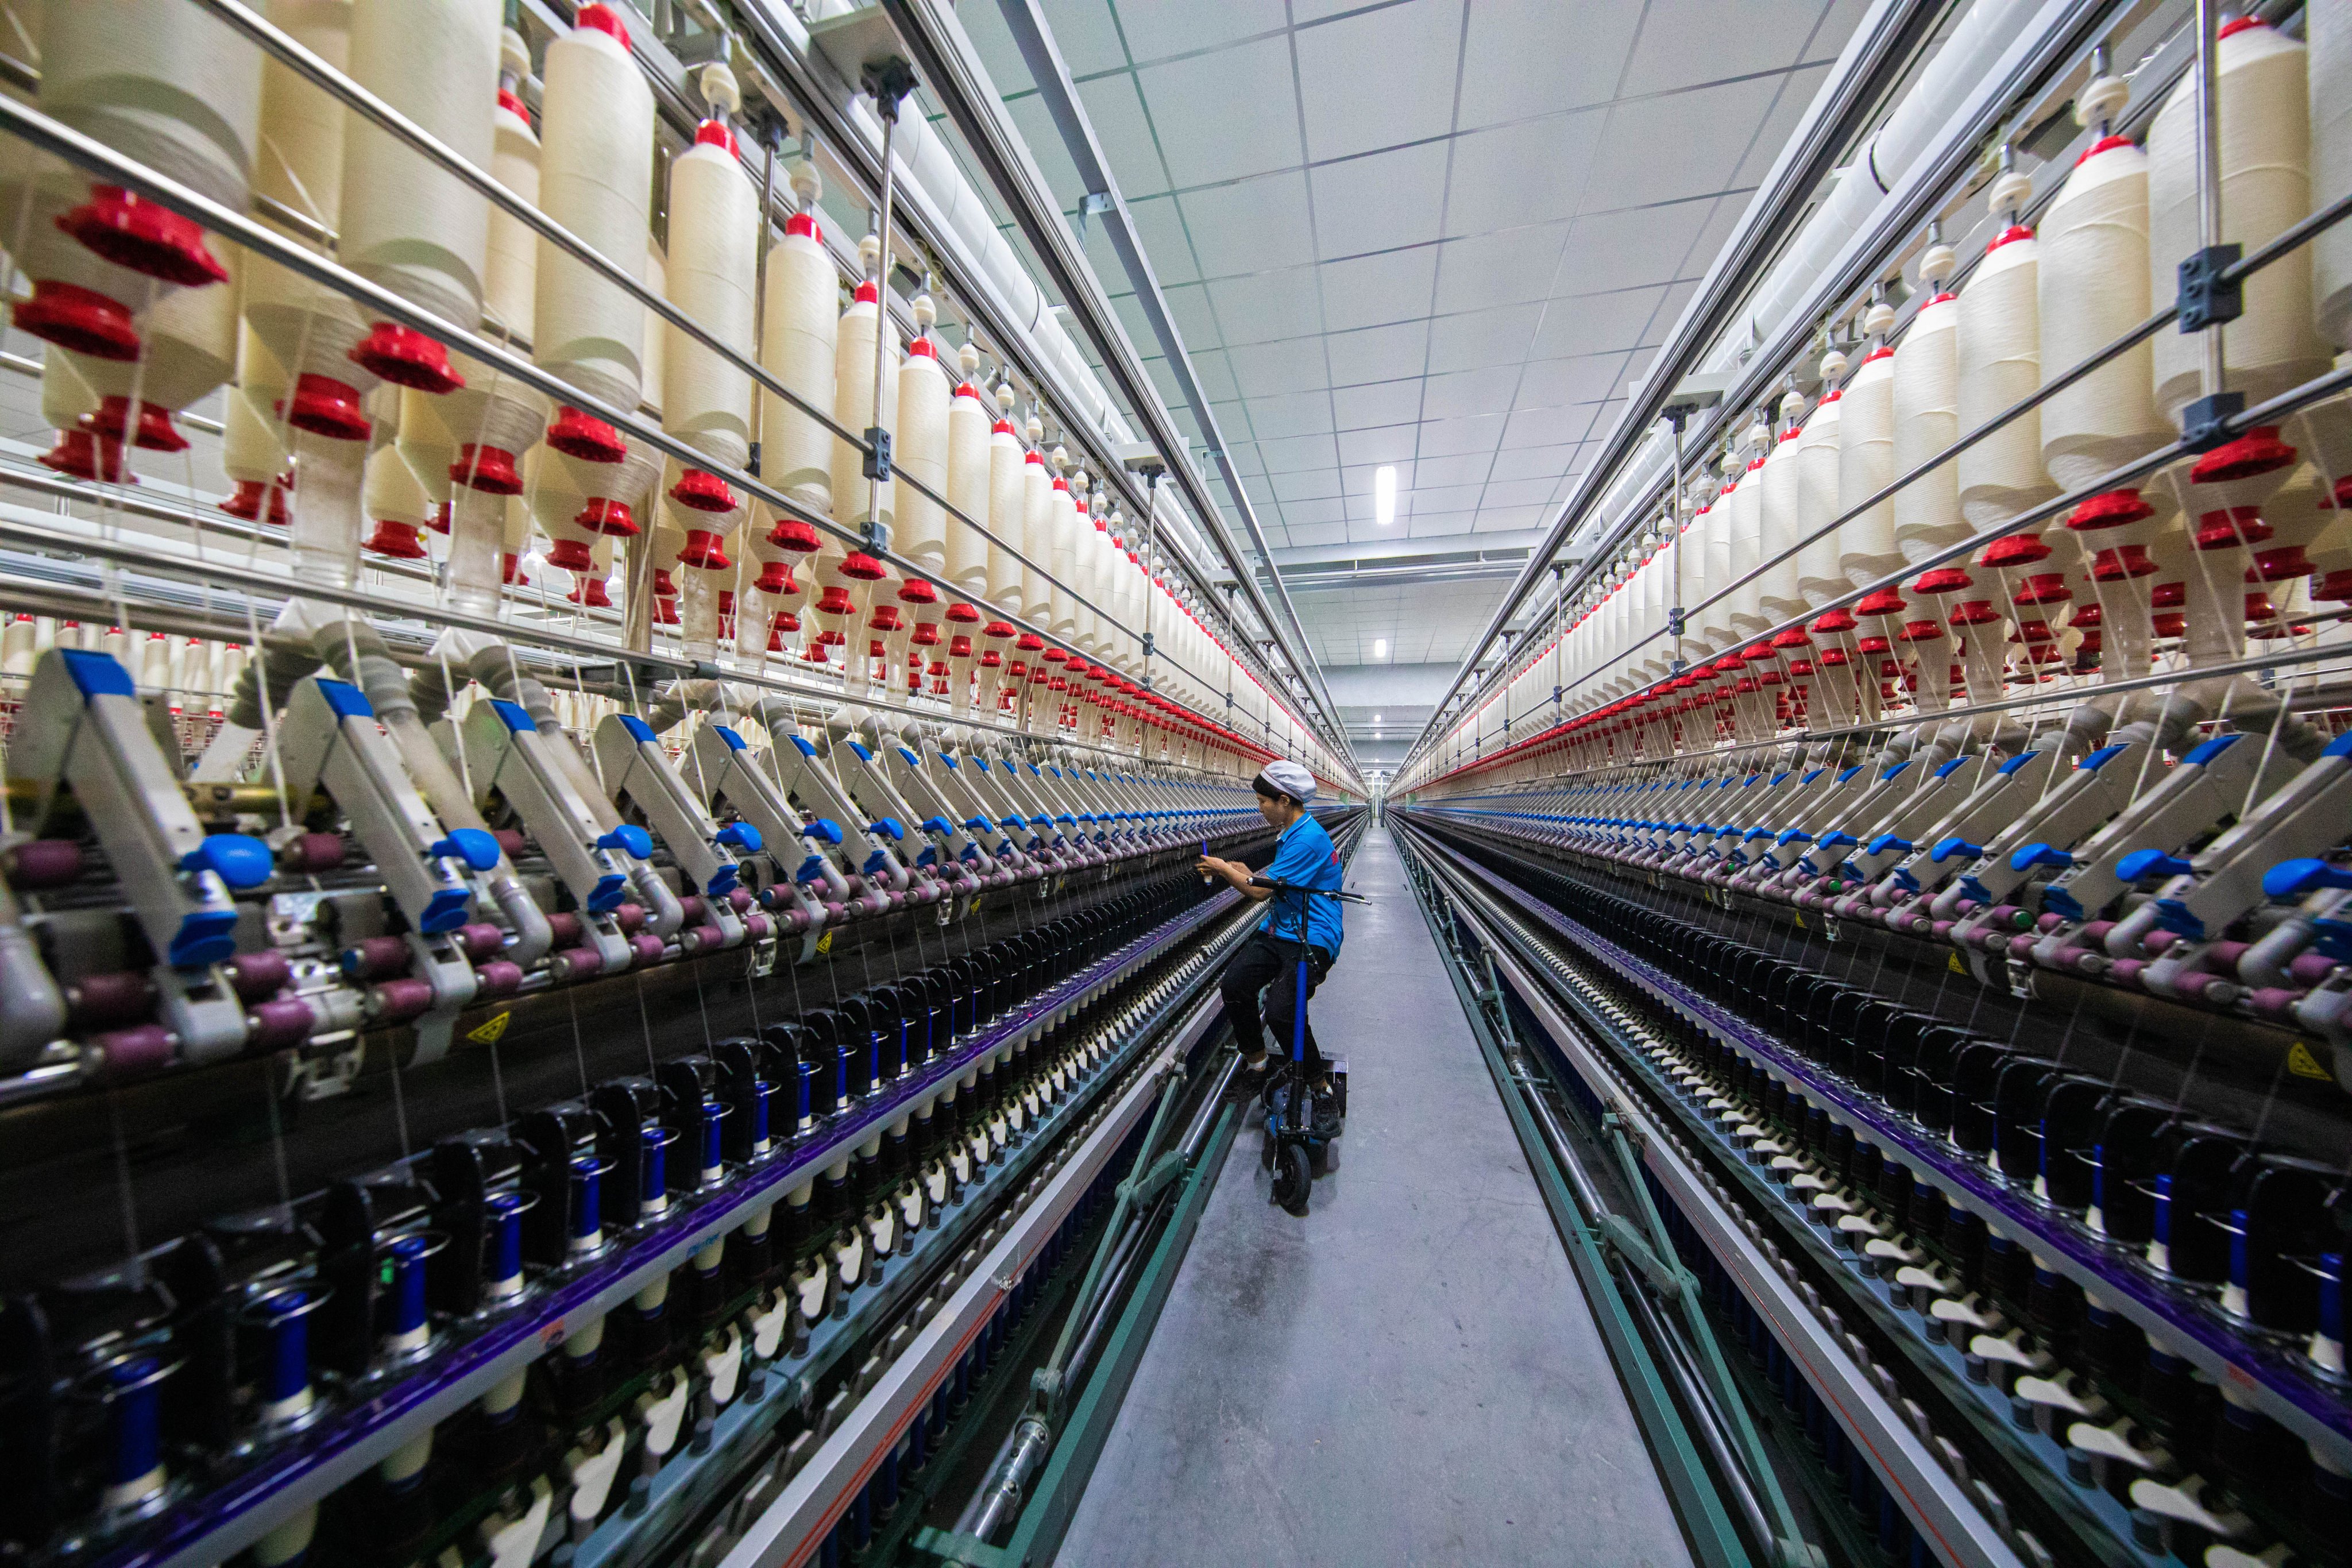 Spinning machines in Xinjiang textile factories are connected via 5G technology and being overseen by artificial intelligence, according to a team of scientists in China. Photo: Getty Images